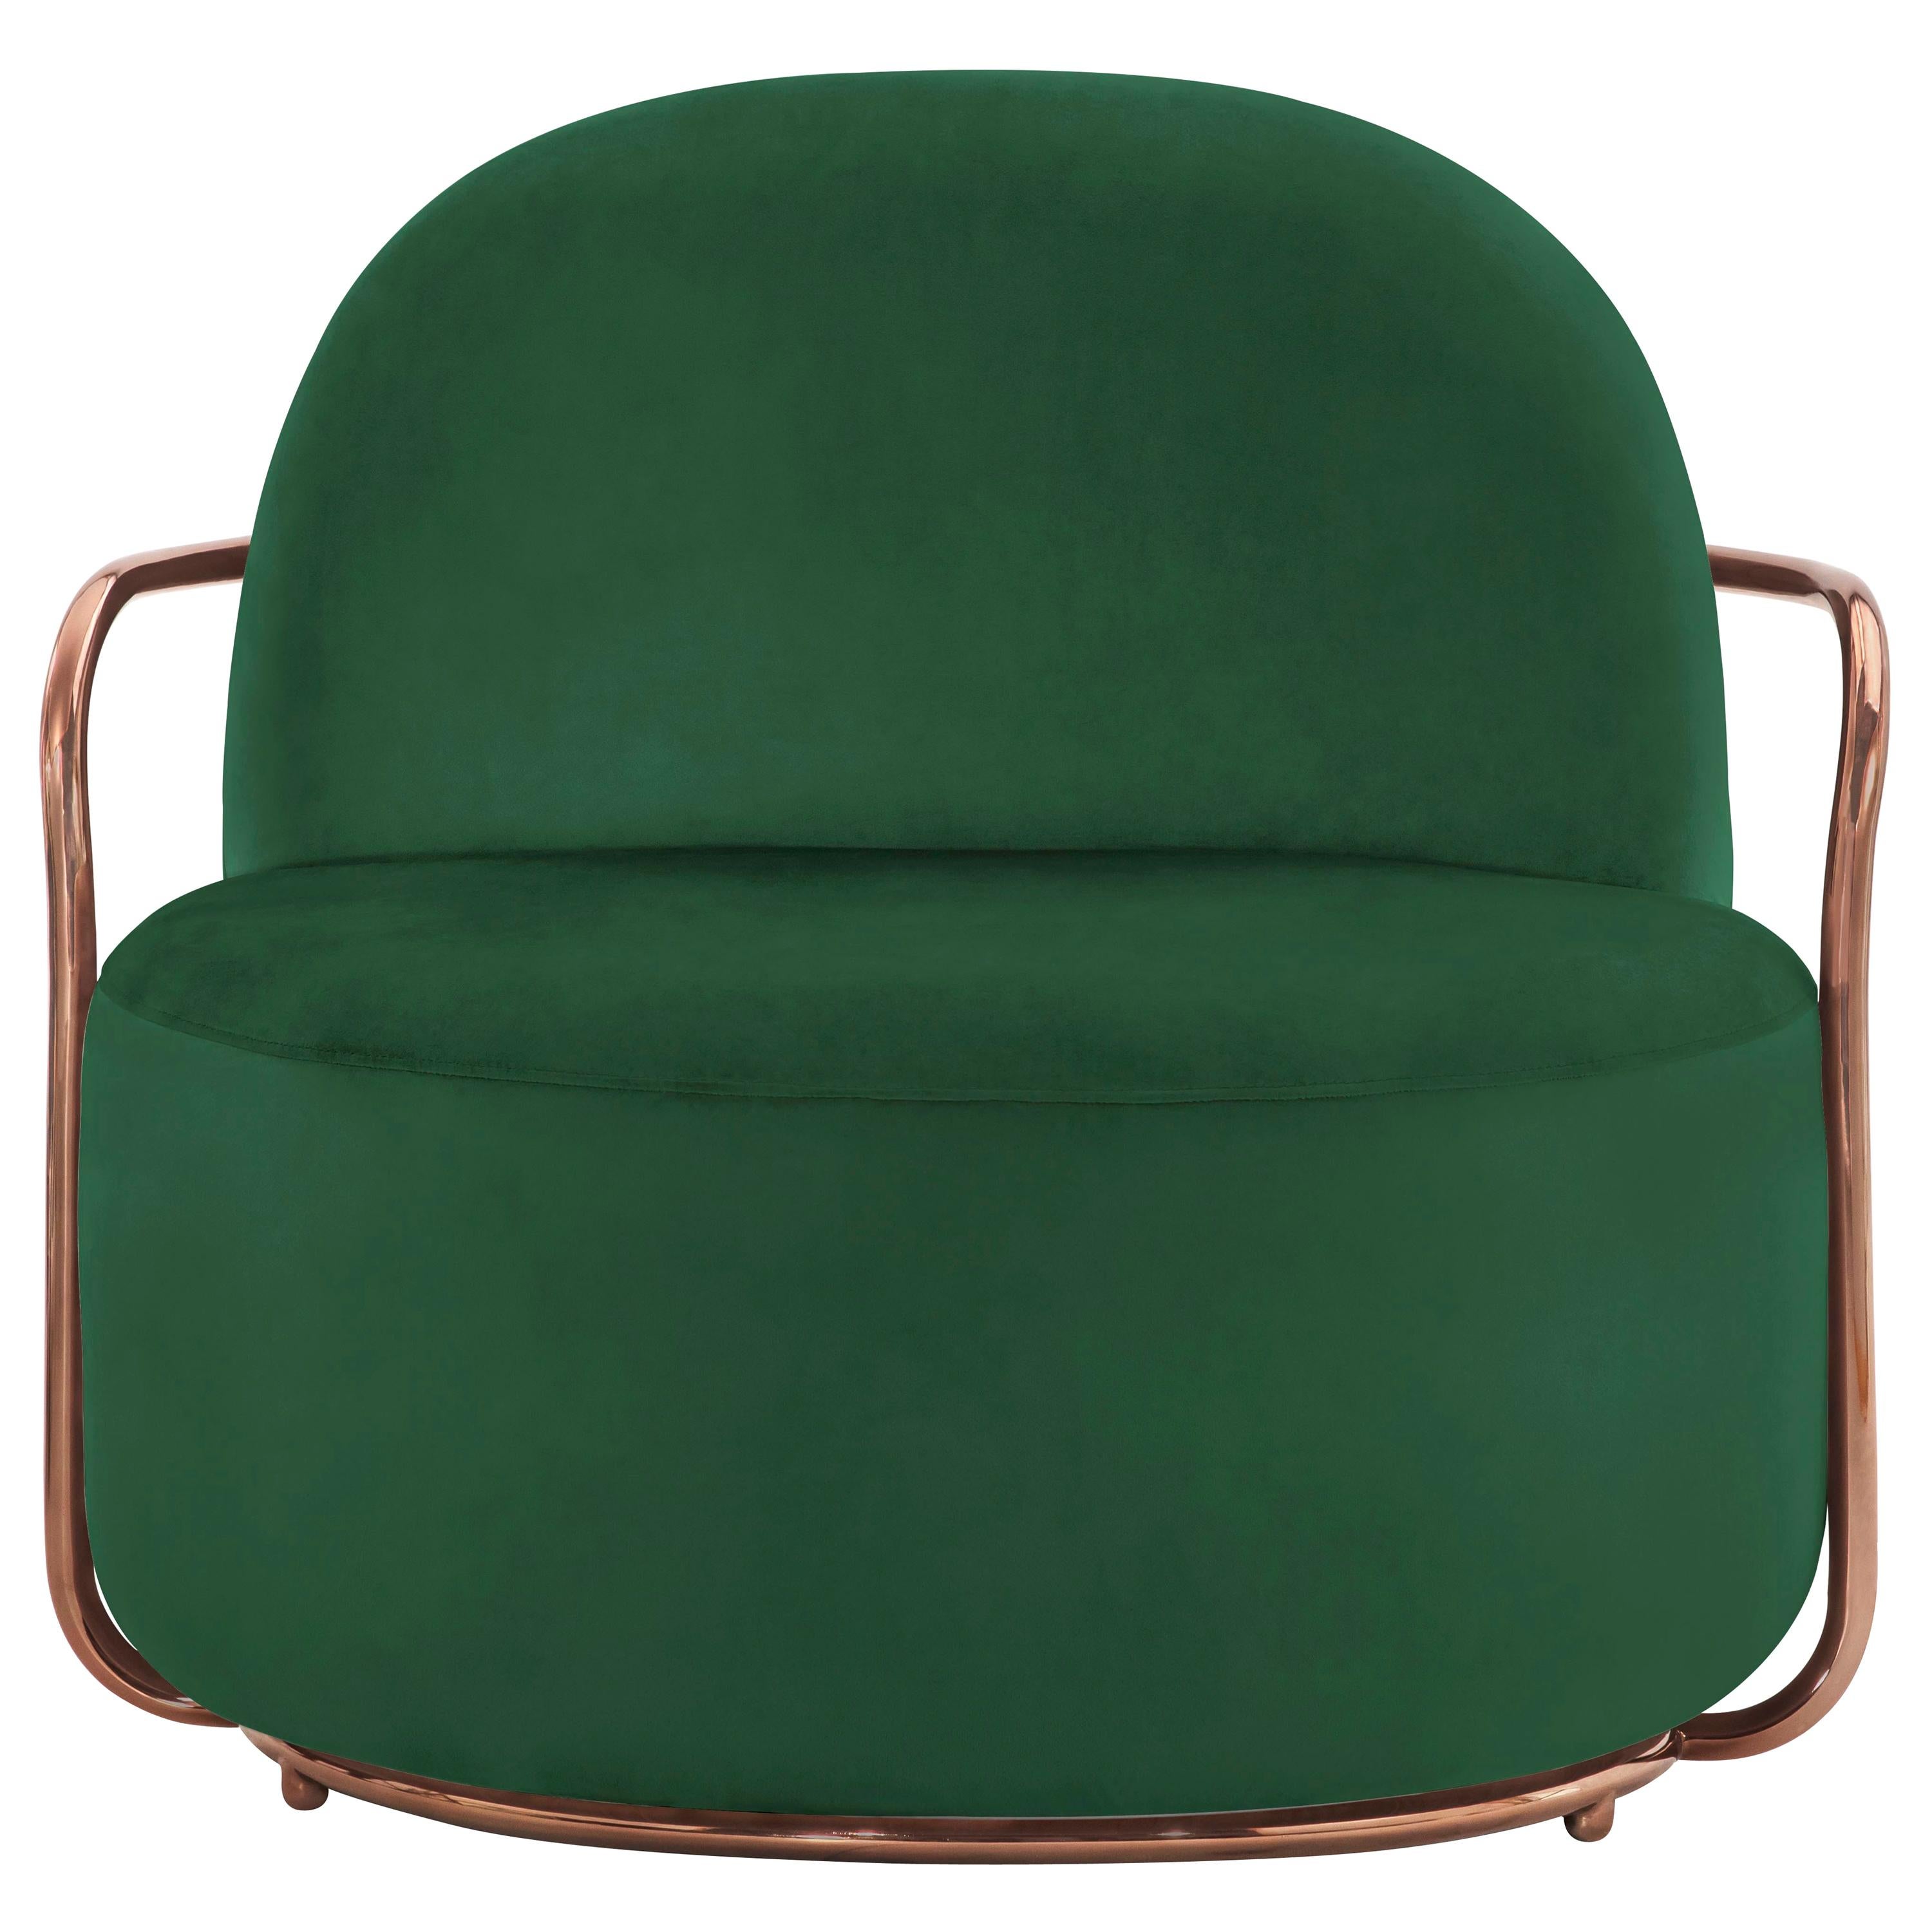 Orion Lounge Chair with Plush Green Velvet and Rose Gold Arms by Nika Zupanc For Sale